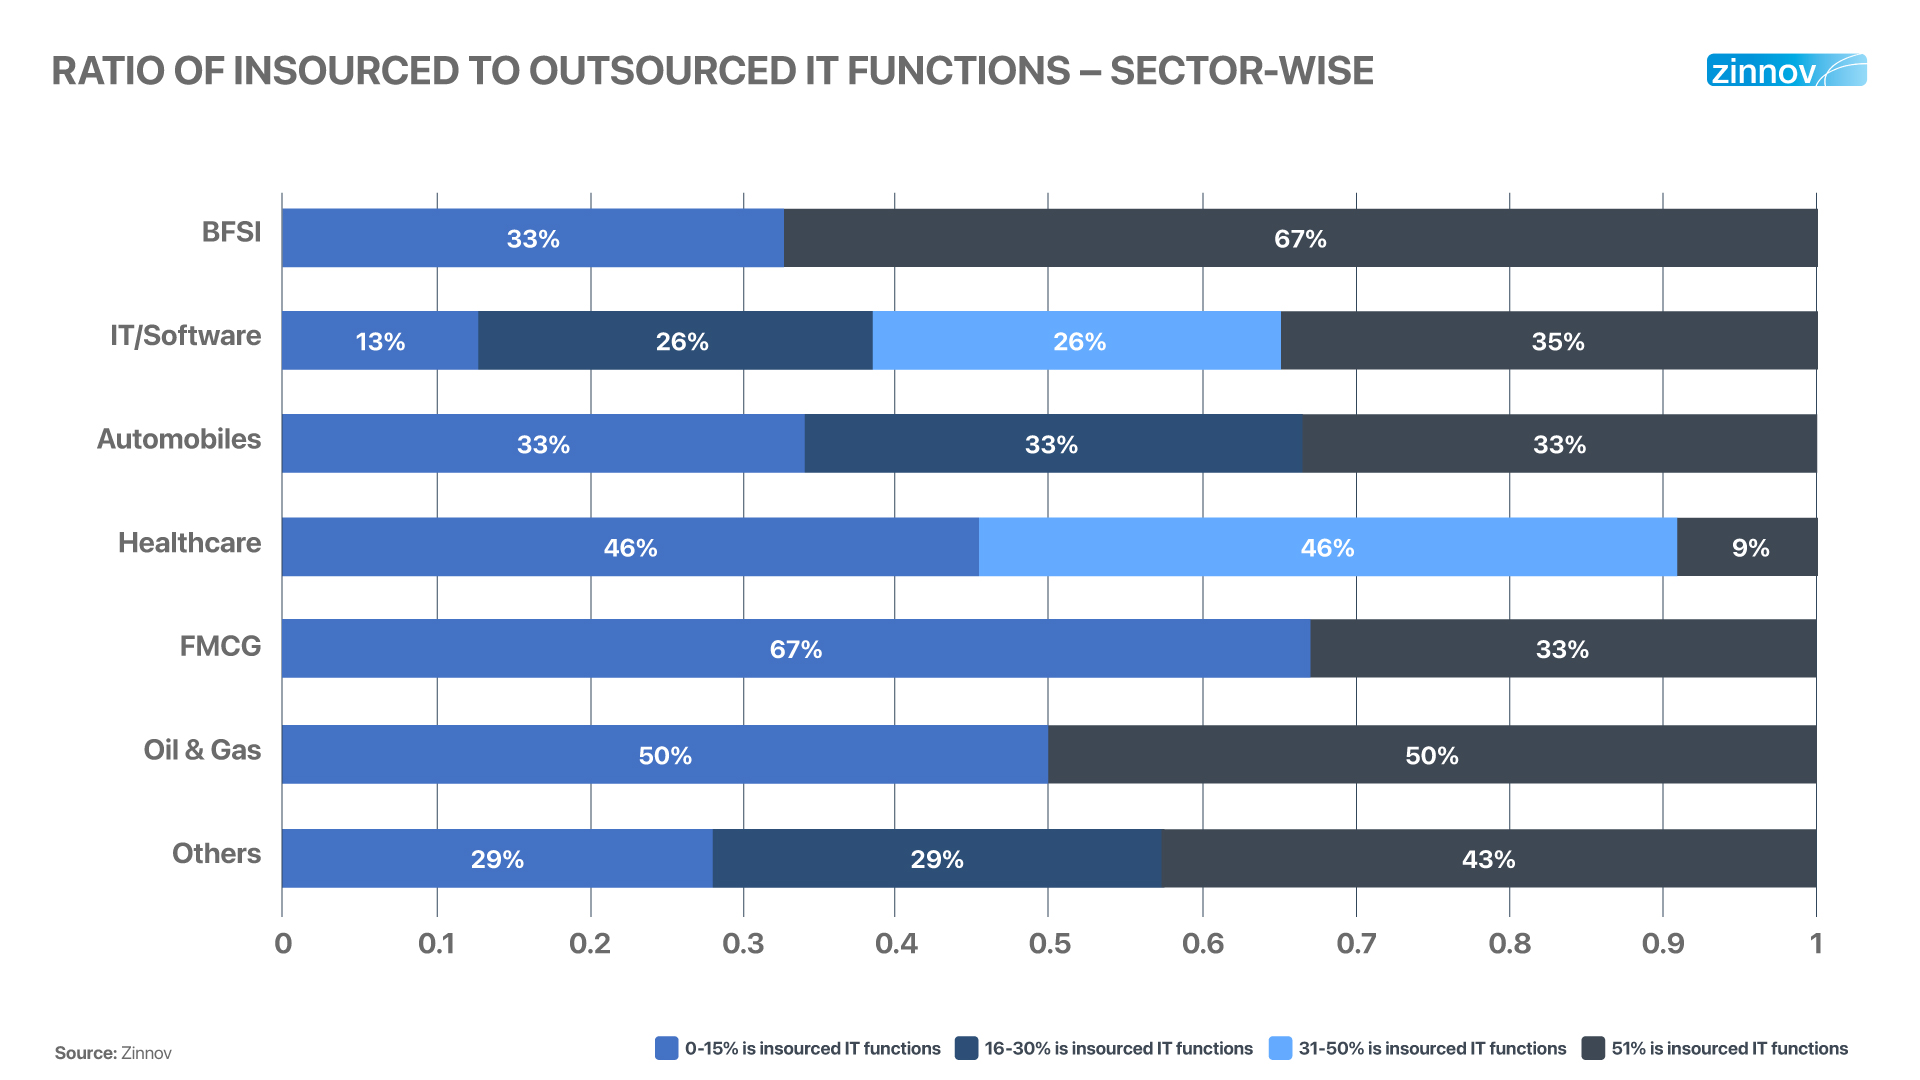 Sector-wise ratio of insourced and outsourced  IT functions